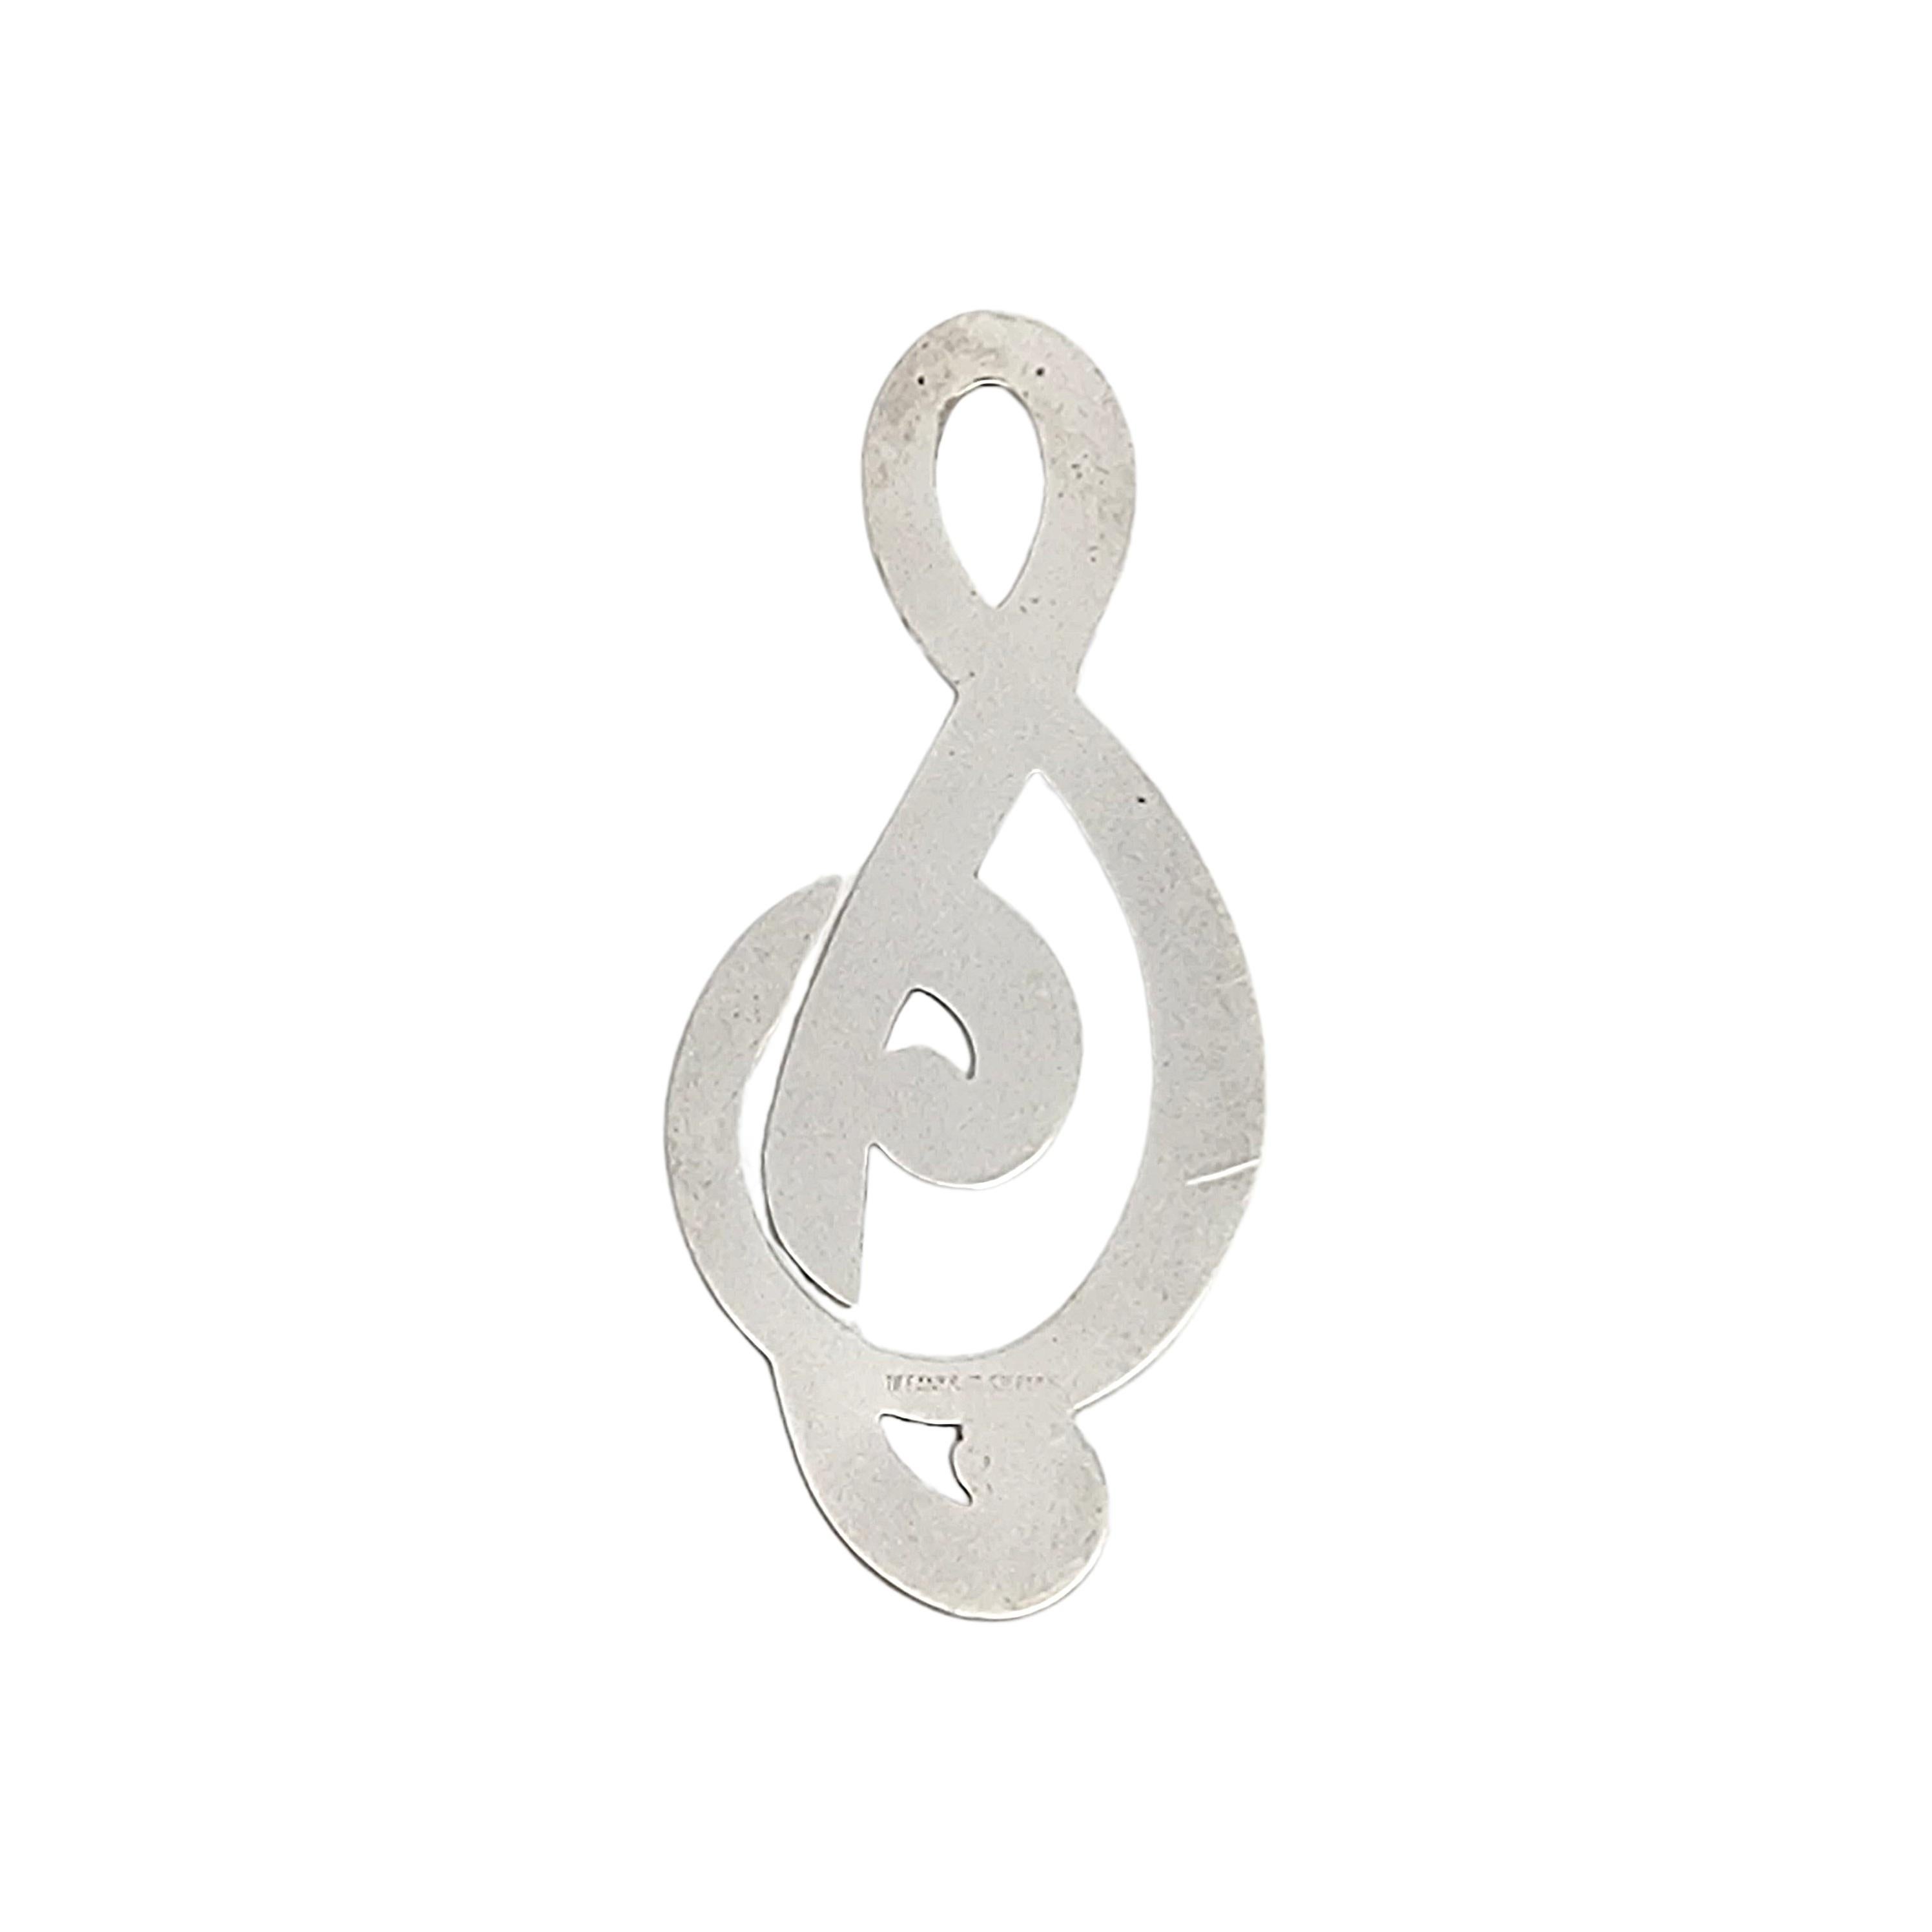 Tiffany & Co sterling silver treble clef bookmark clip.

Authentic Tiffany sterling silver bookmark or clip in the shape of a musical treble clef. Does not include Tiffany & Co box or pouch.

Measures approx 3